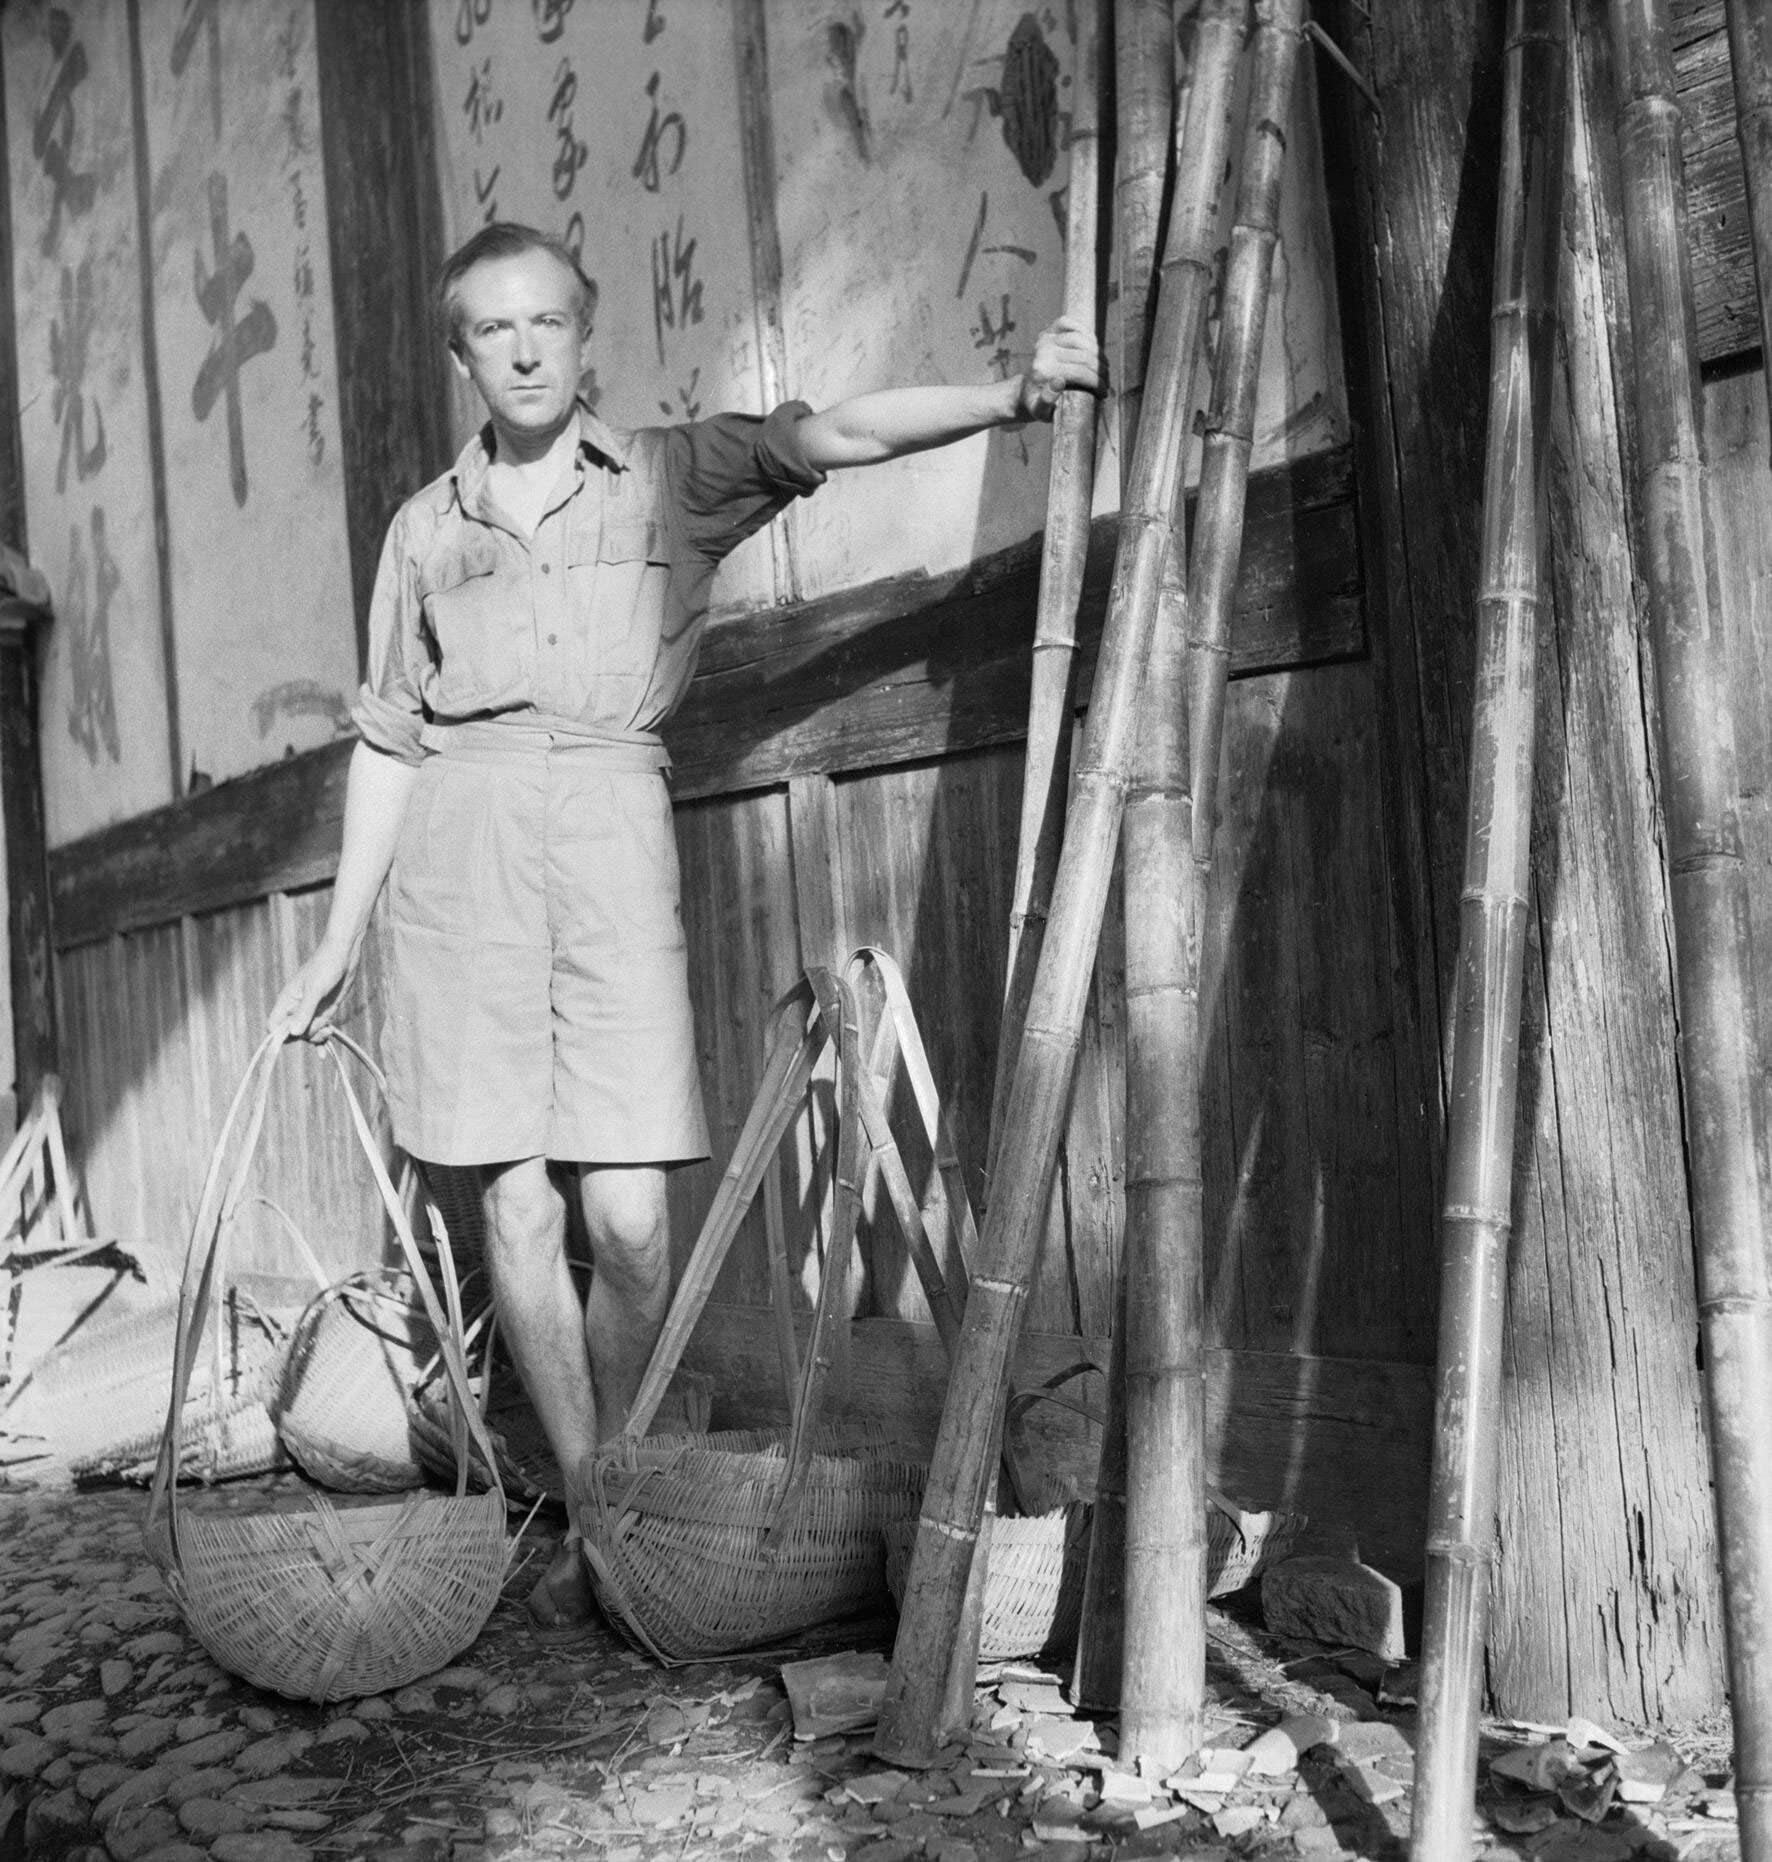 Cecil Beaton with wicker baskets beside a wall with Chinese characters in Puncheng in south eastern China, during World War II. Image courtesy of the Ministry of Information, via Wikimedia Commons